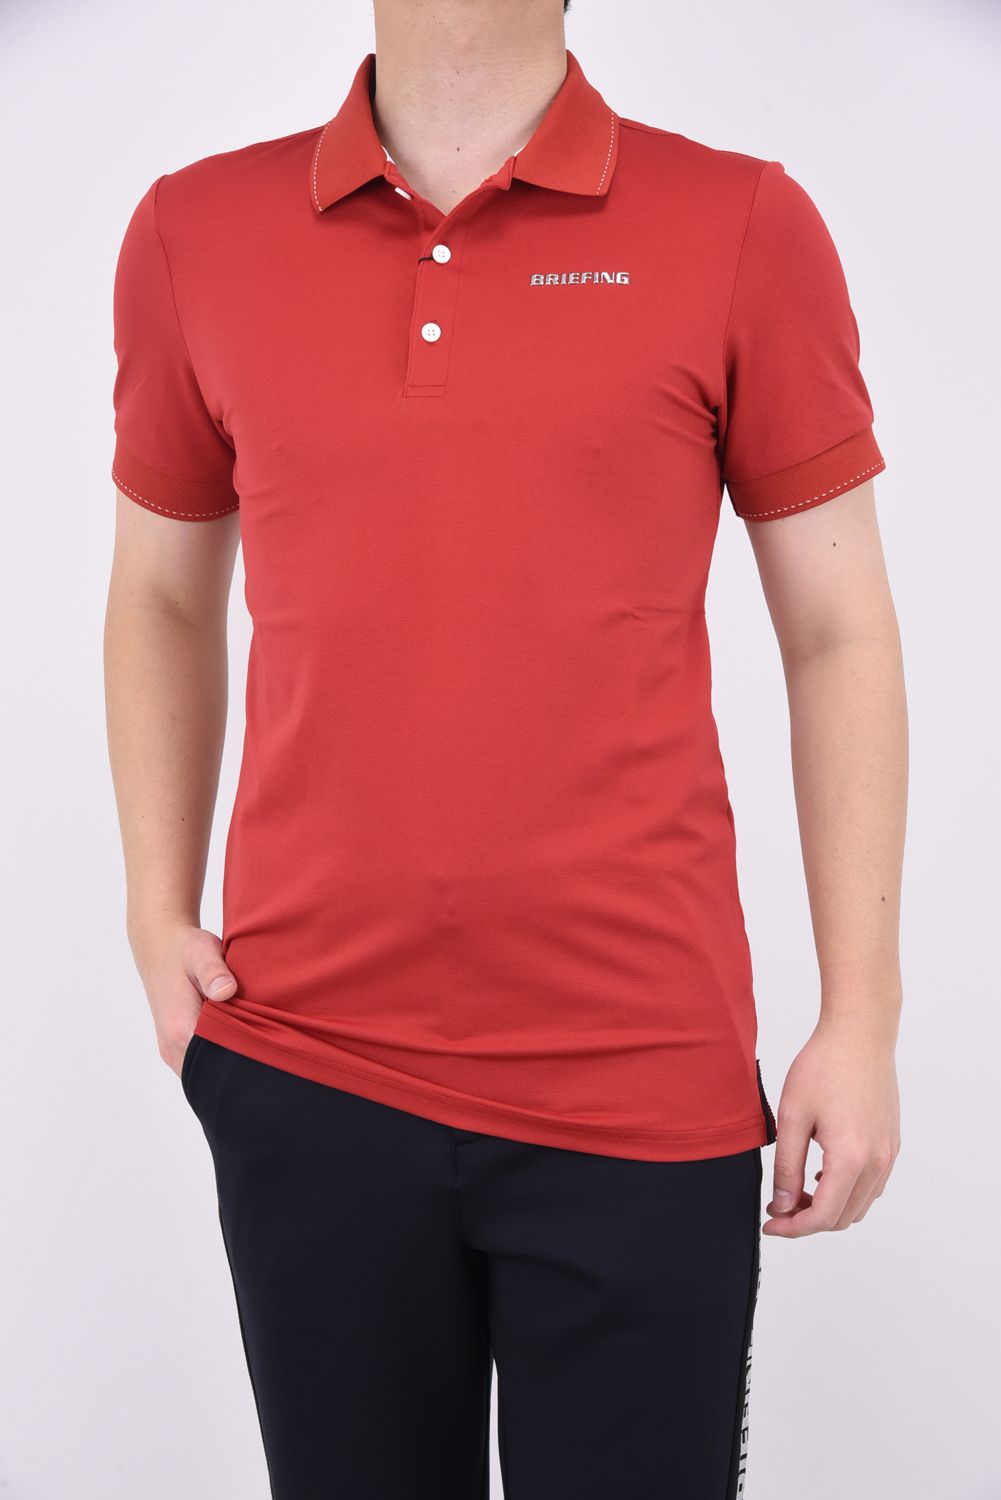 BRIEFING - MENS BASIC POLO / メタリックロゴ ベーシック ポロシャツ ...